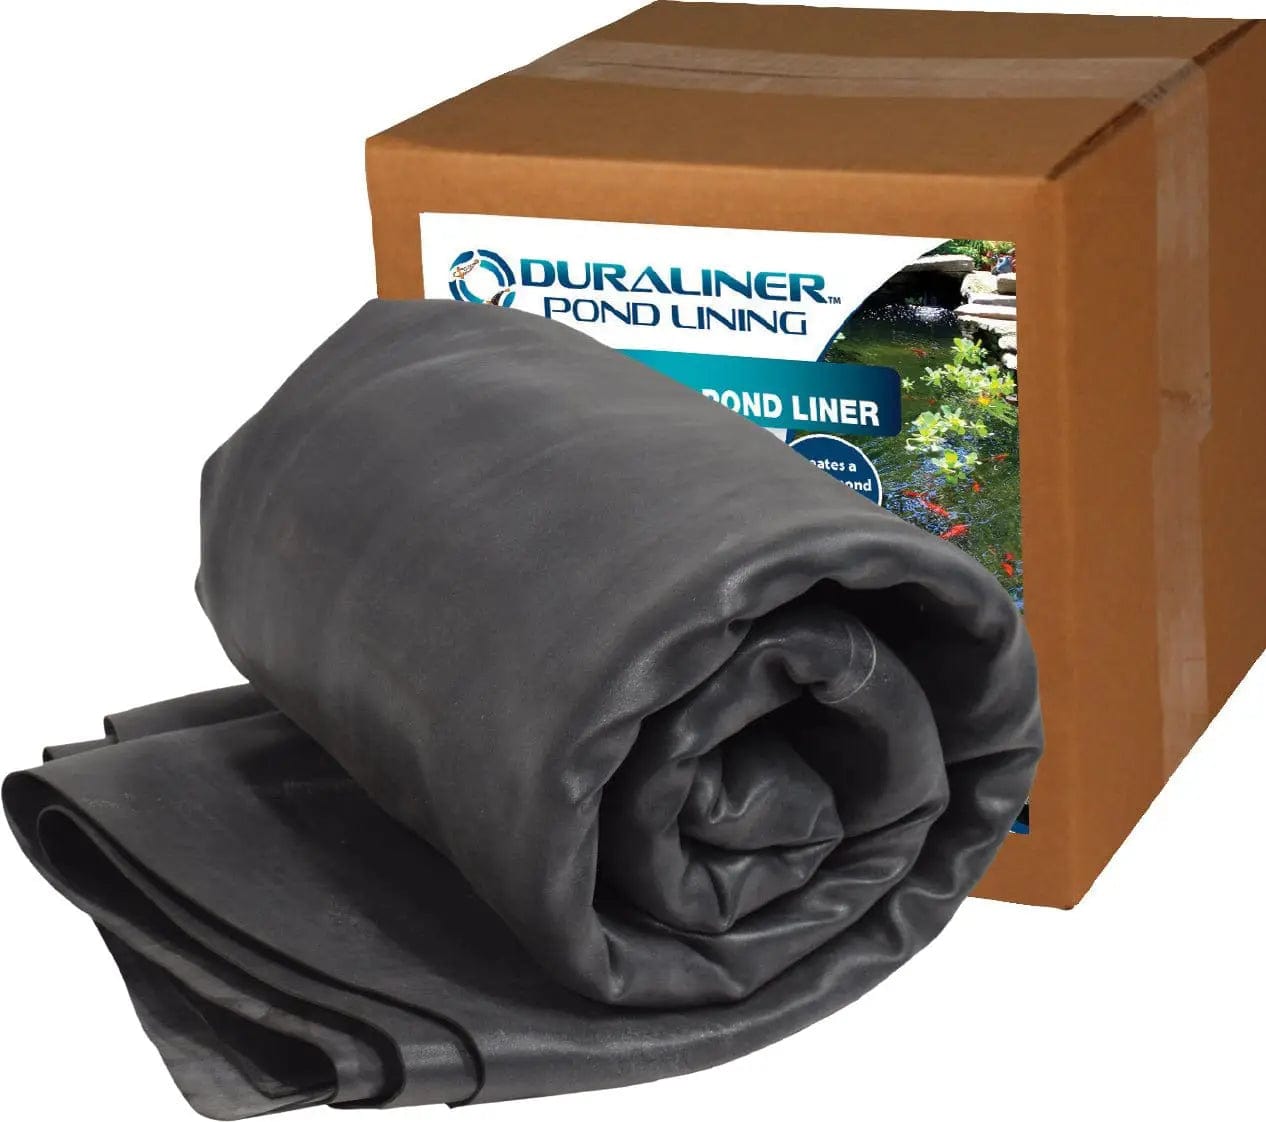 EasyPro Pond Liner and Accessories DuraLiner 45mil Rubber Boxed Pond Liner